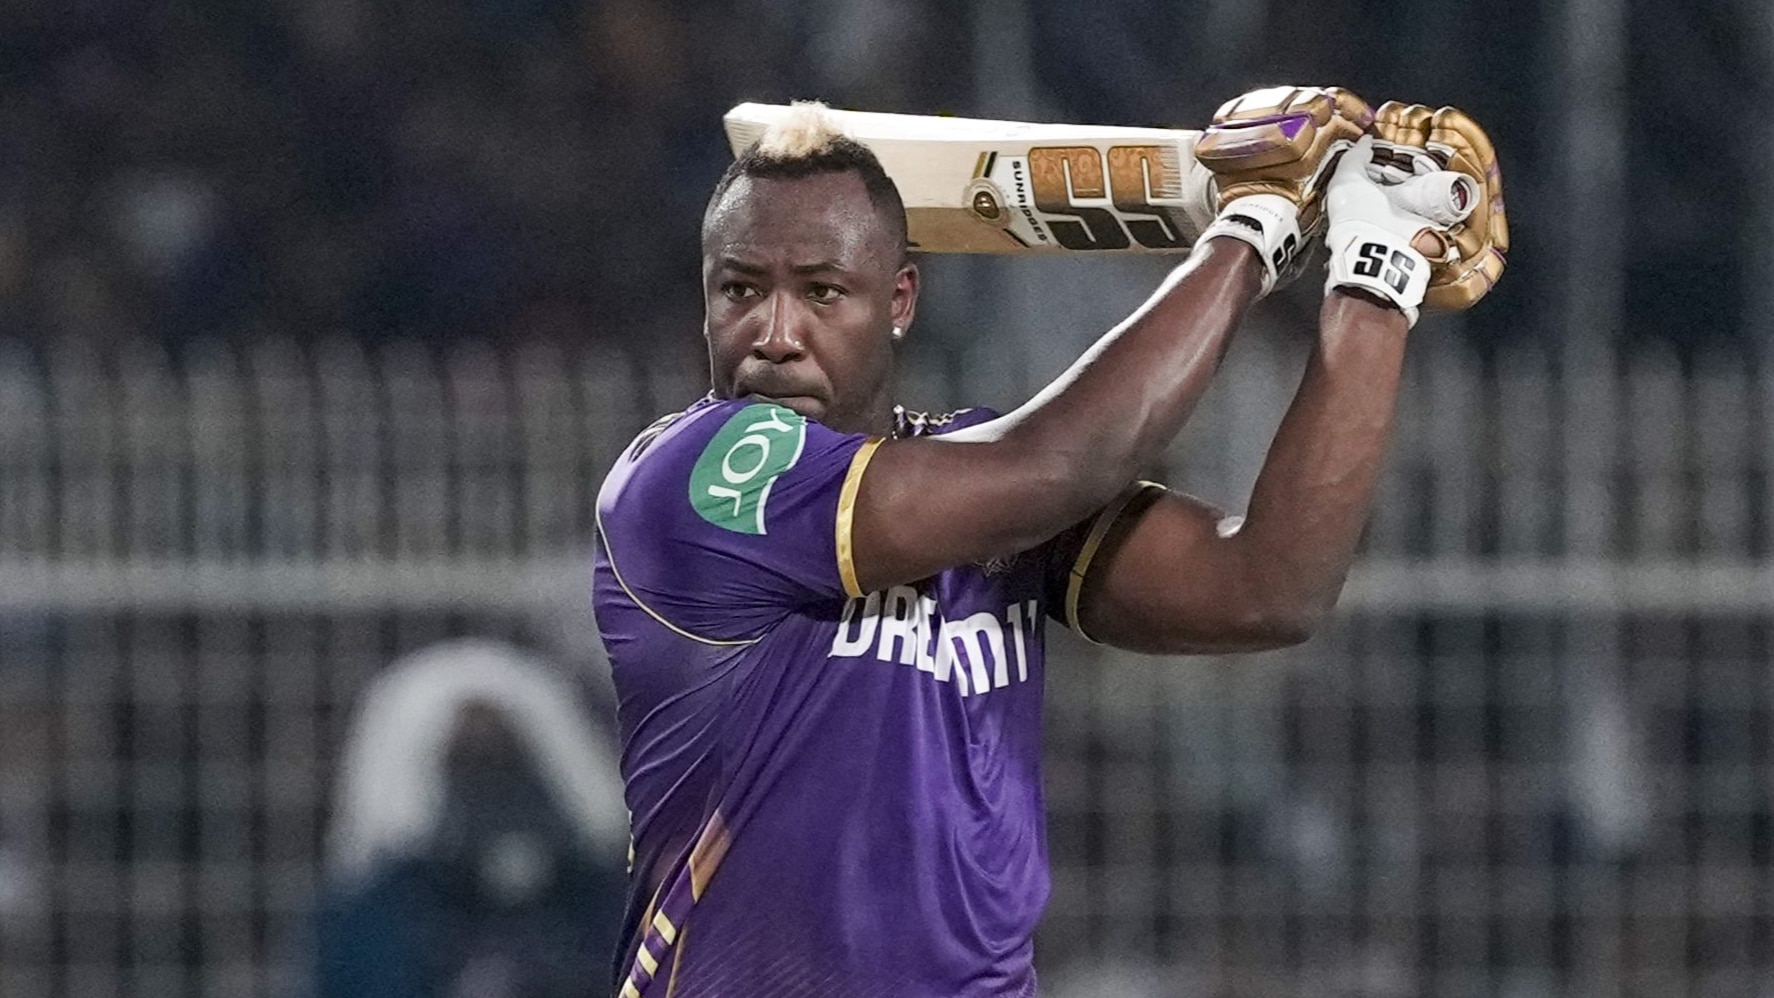 andre russell